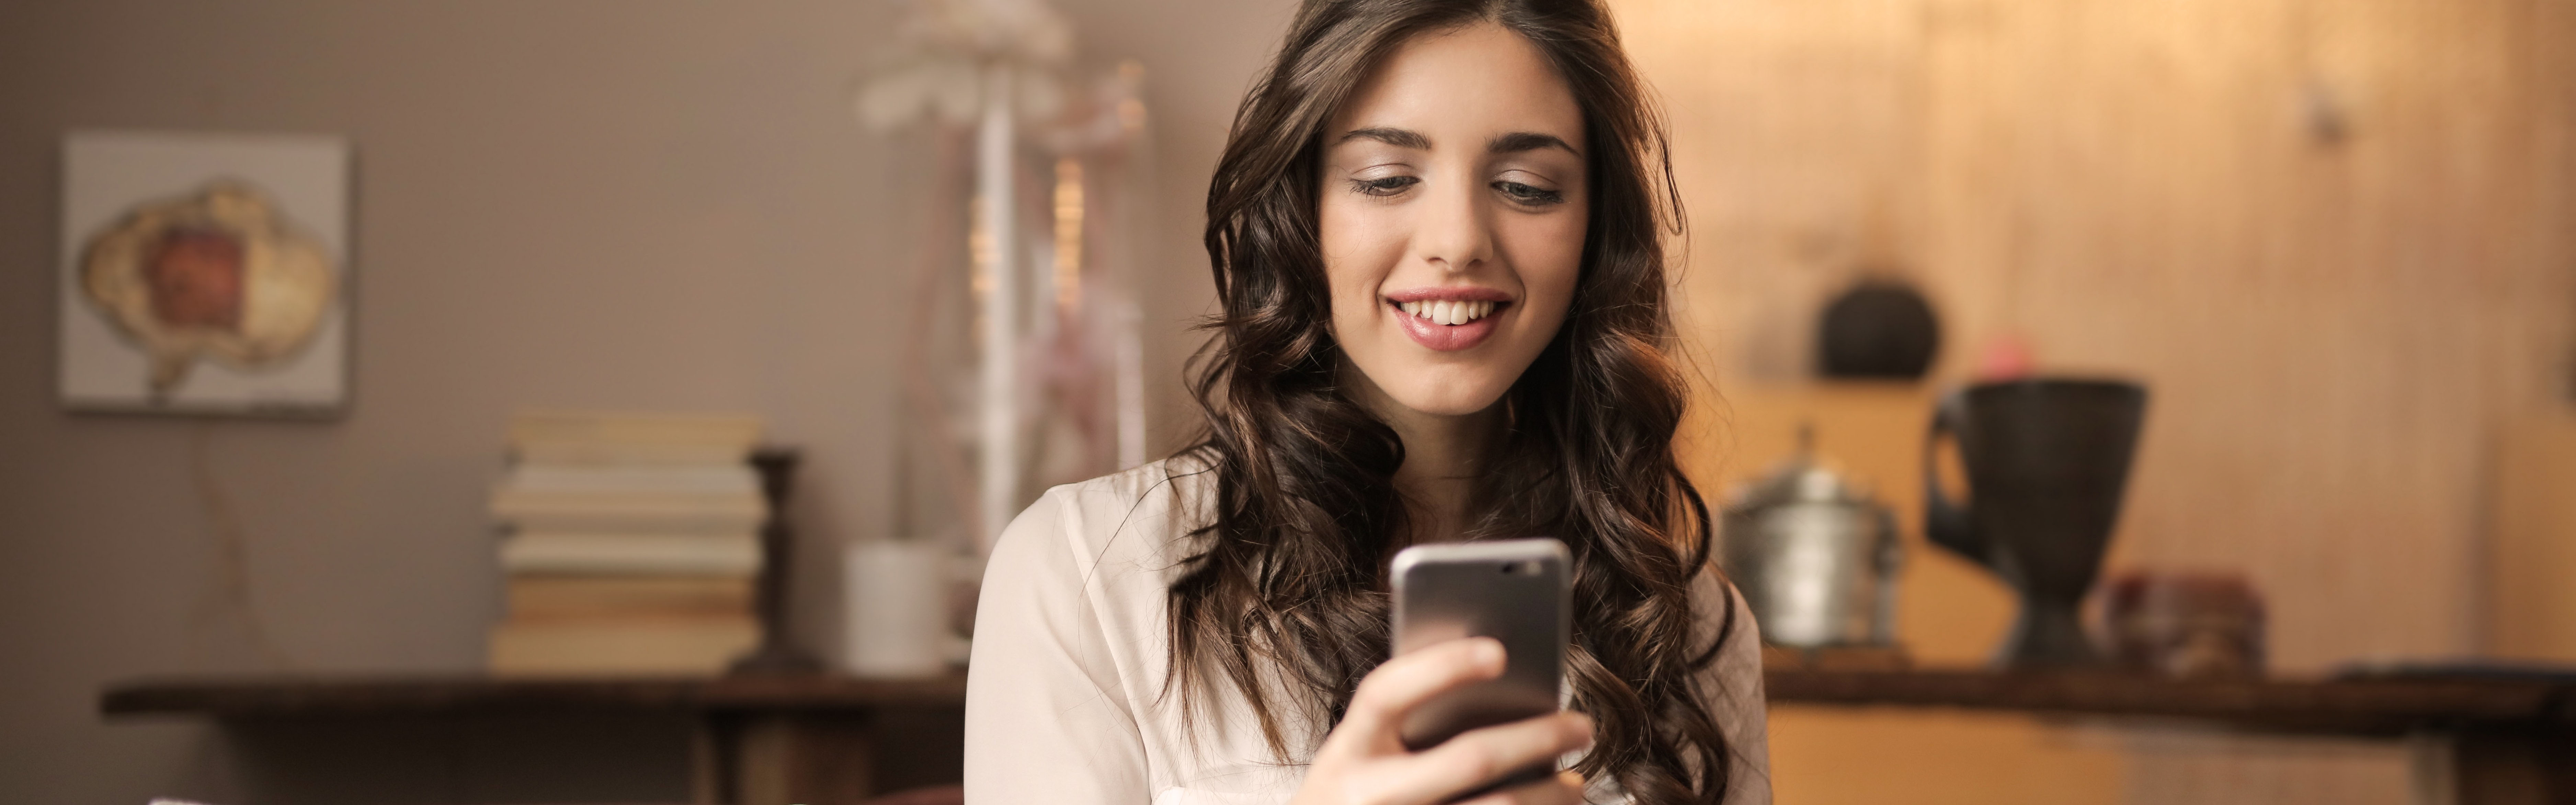 Young woman smiling at smartphone, possibly checking her email metrics.